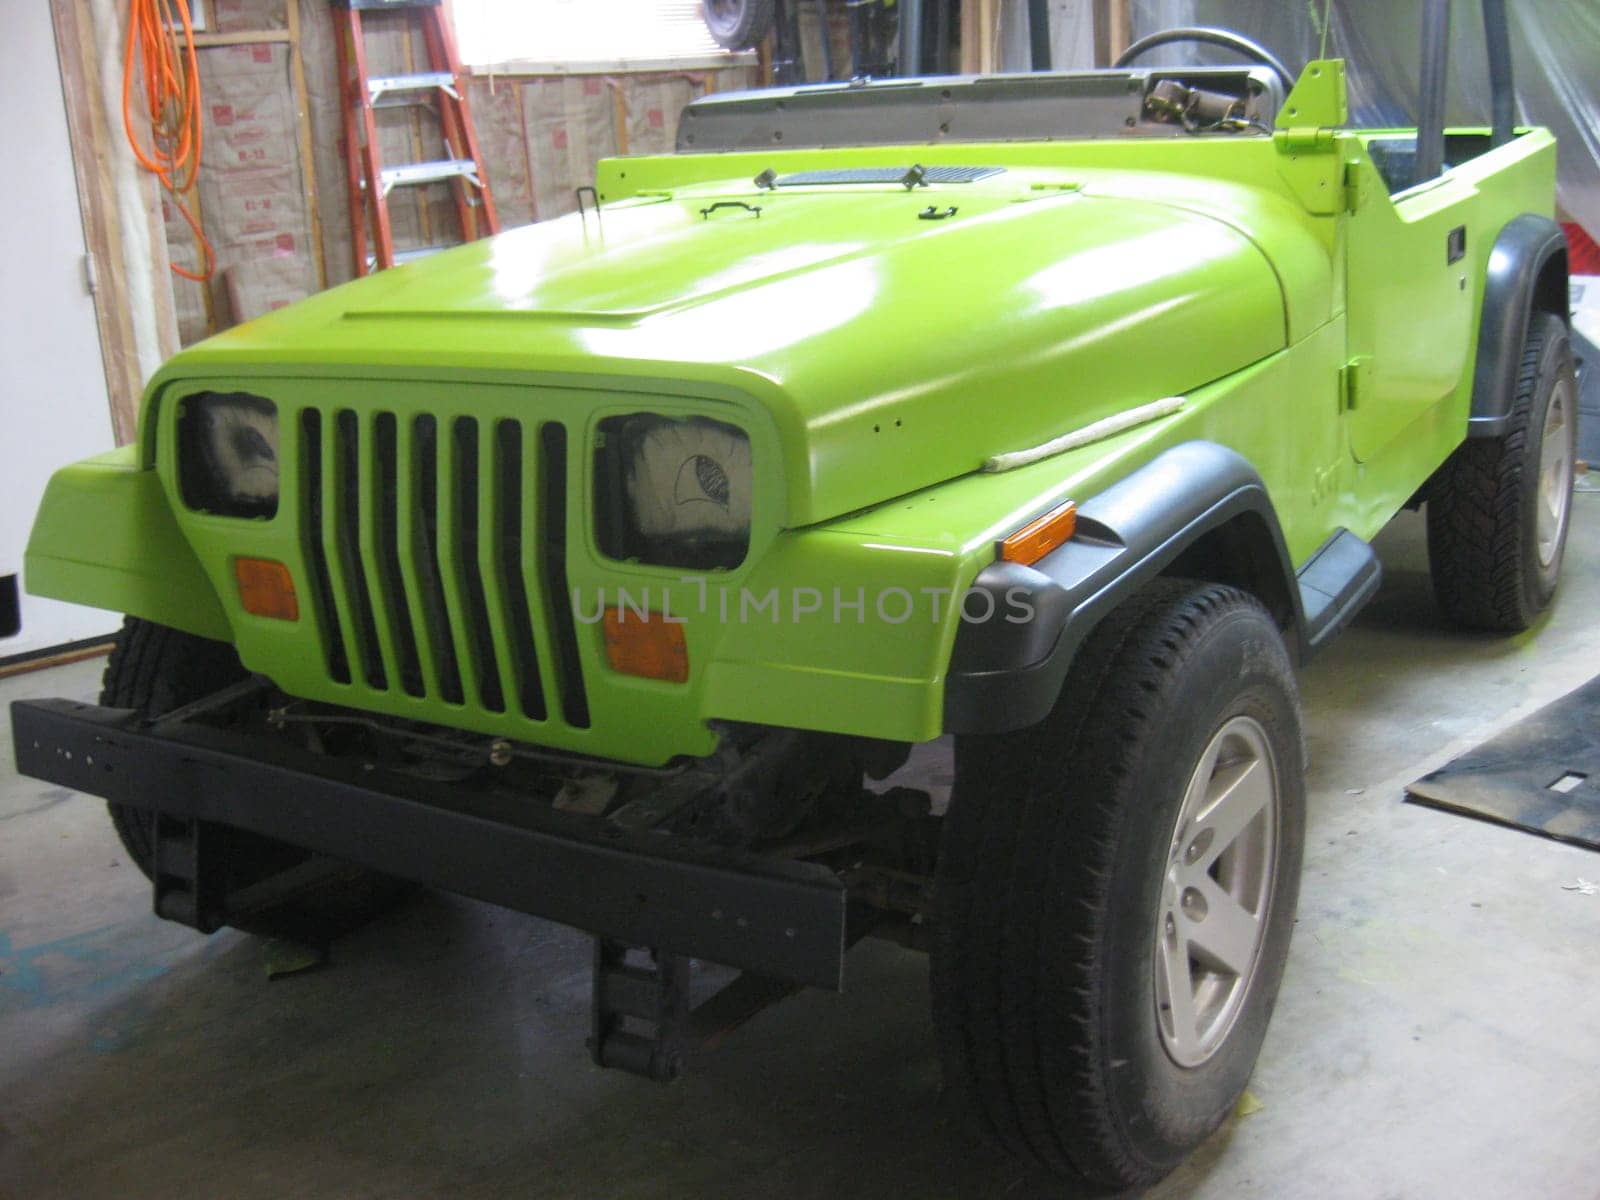 Vehicle with Eyes for Headlights, Lime Green Paint Job, 1990s Vehicle by grumblytumbleweed